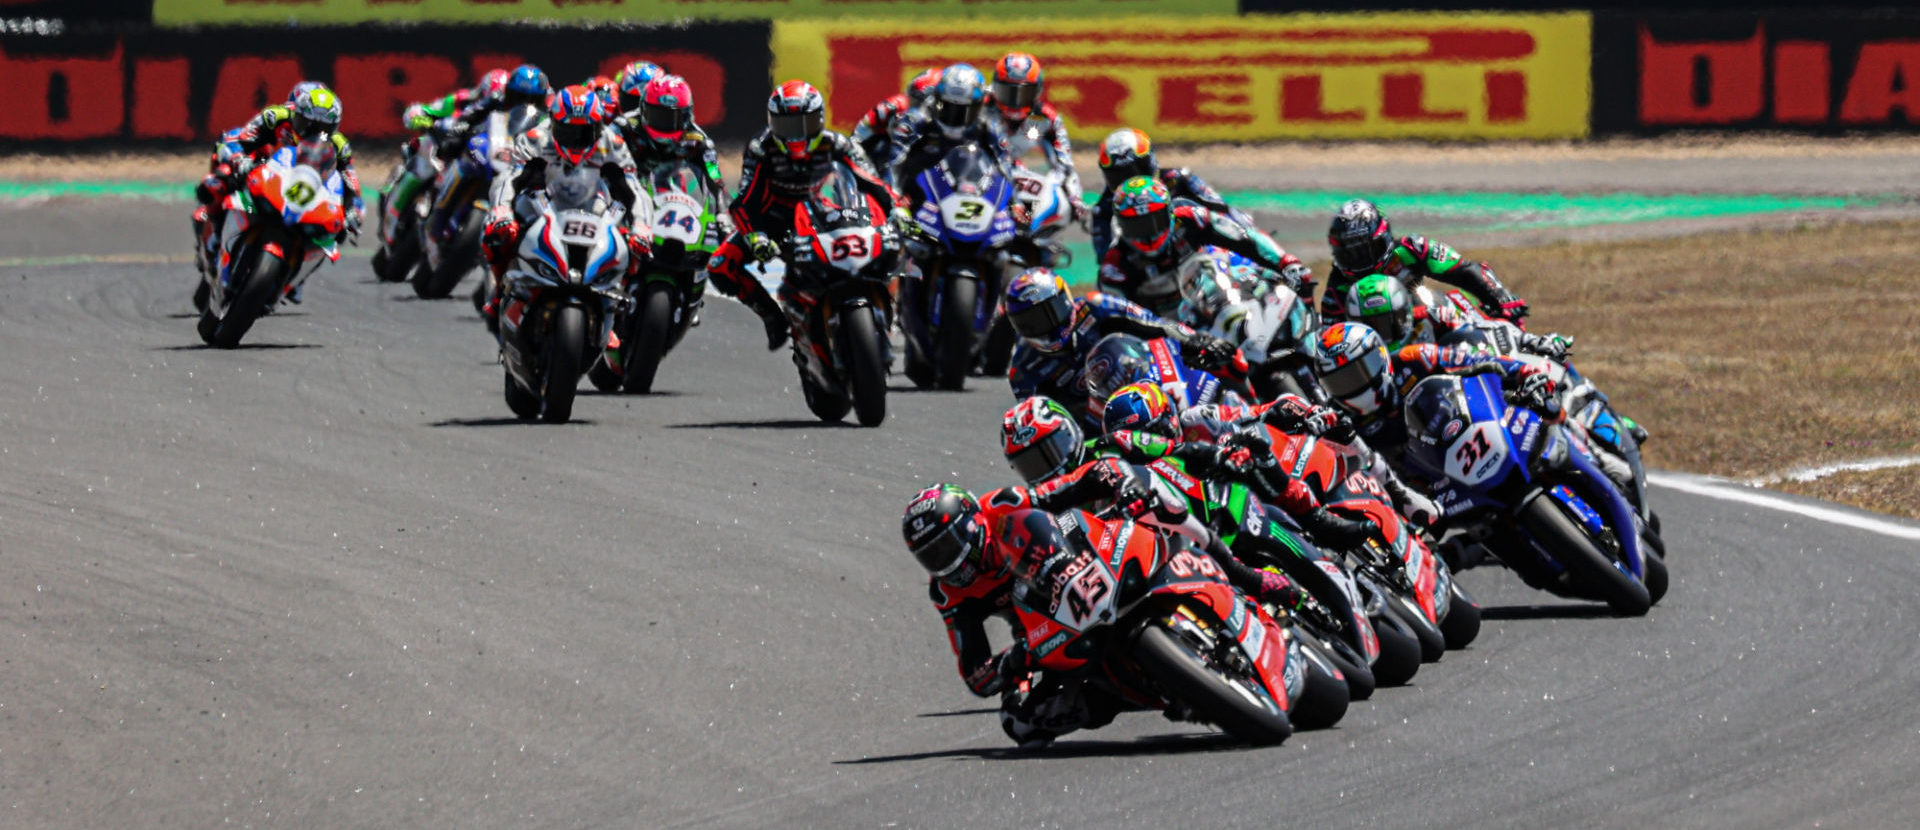 The riders of the FIM Superbike World Championship are heading to the Navarra Circuit this coming weekend. Photo courtesy Dorna.